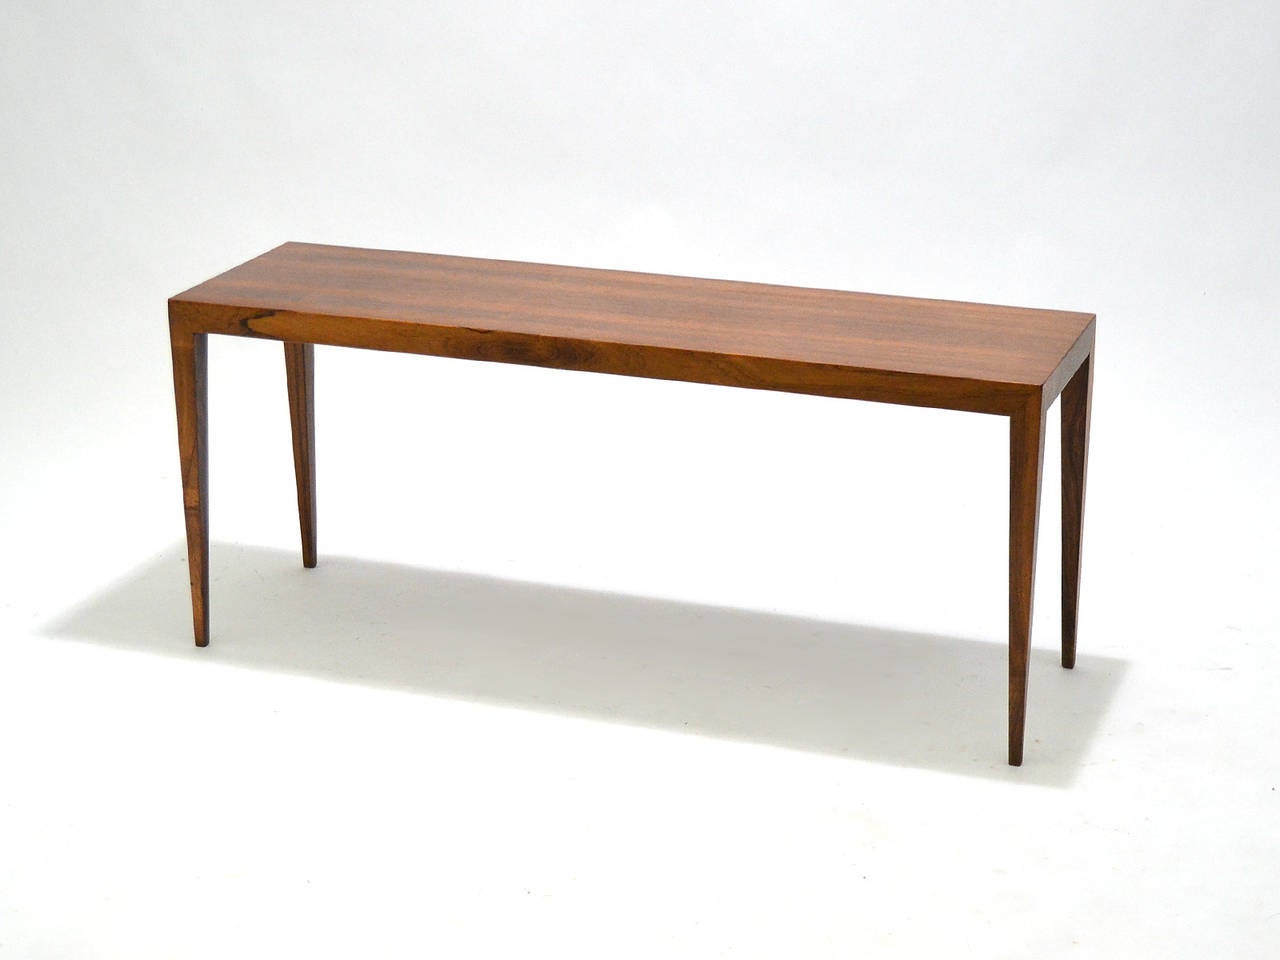 This lovely table by Severin Hansen is noteworthy for its richly figured rosewood as well as the exquisite joinery by cabinetmaker Haslev Mobelsnedkeri. The lean, minimal design and light scale allows the table to serve as a coffee, sofa, or